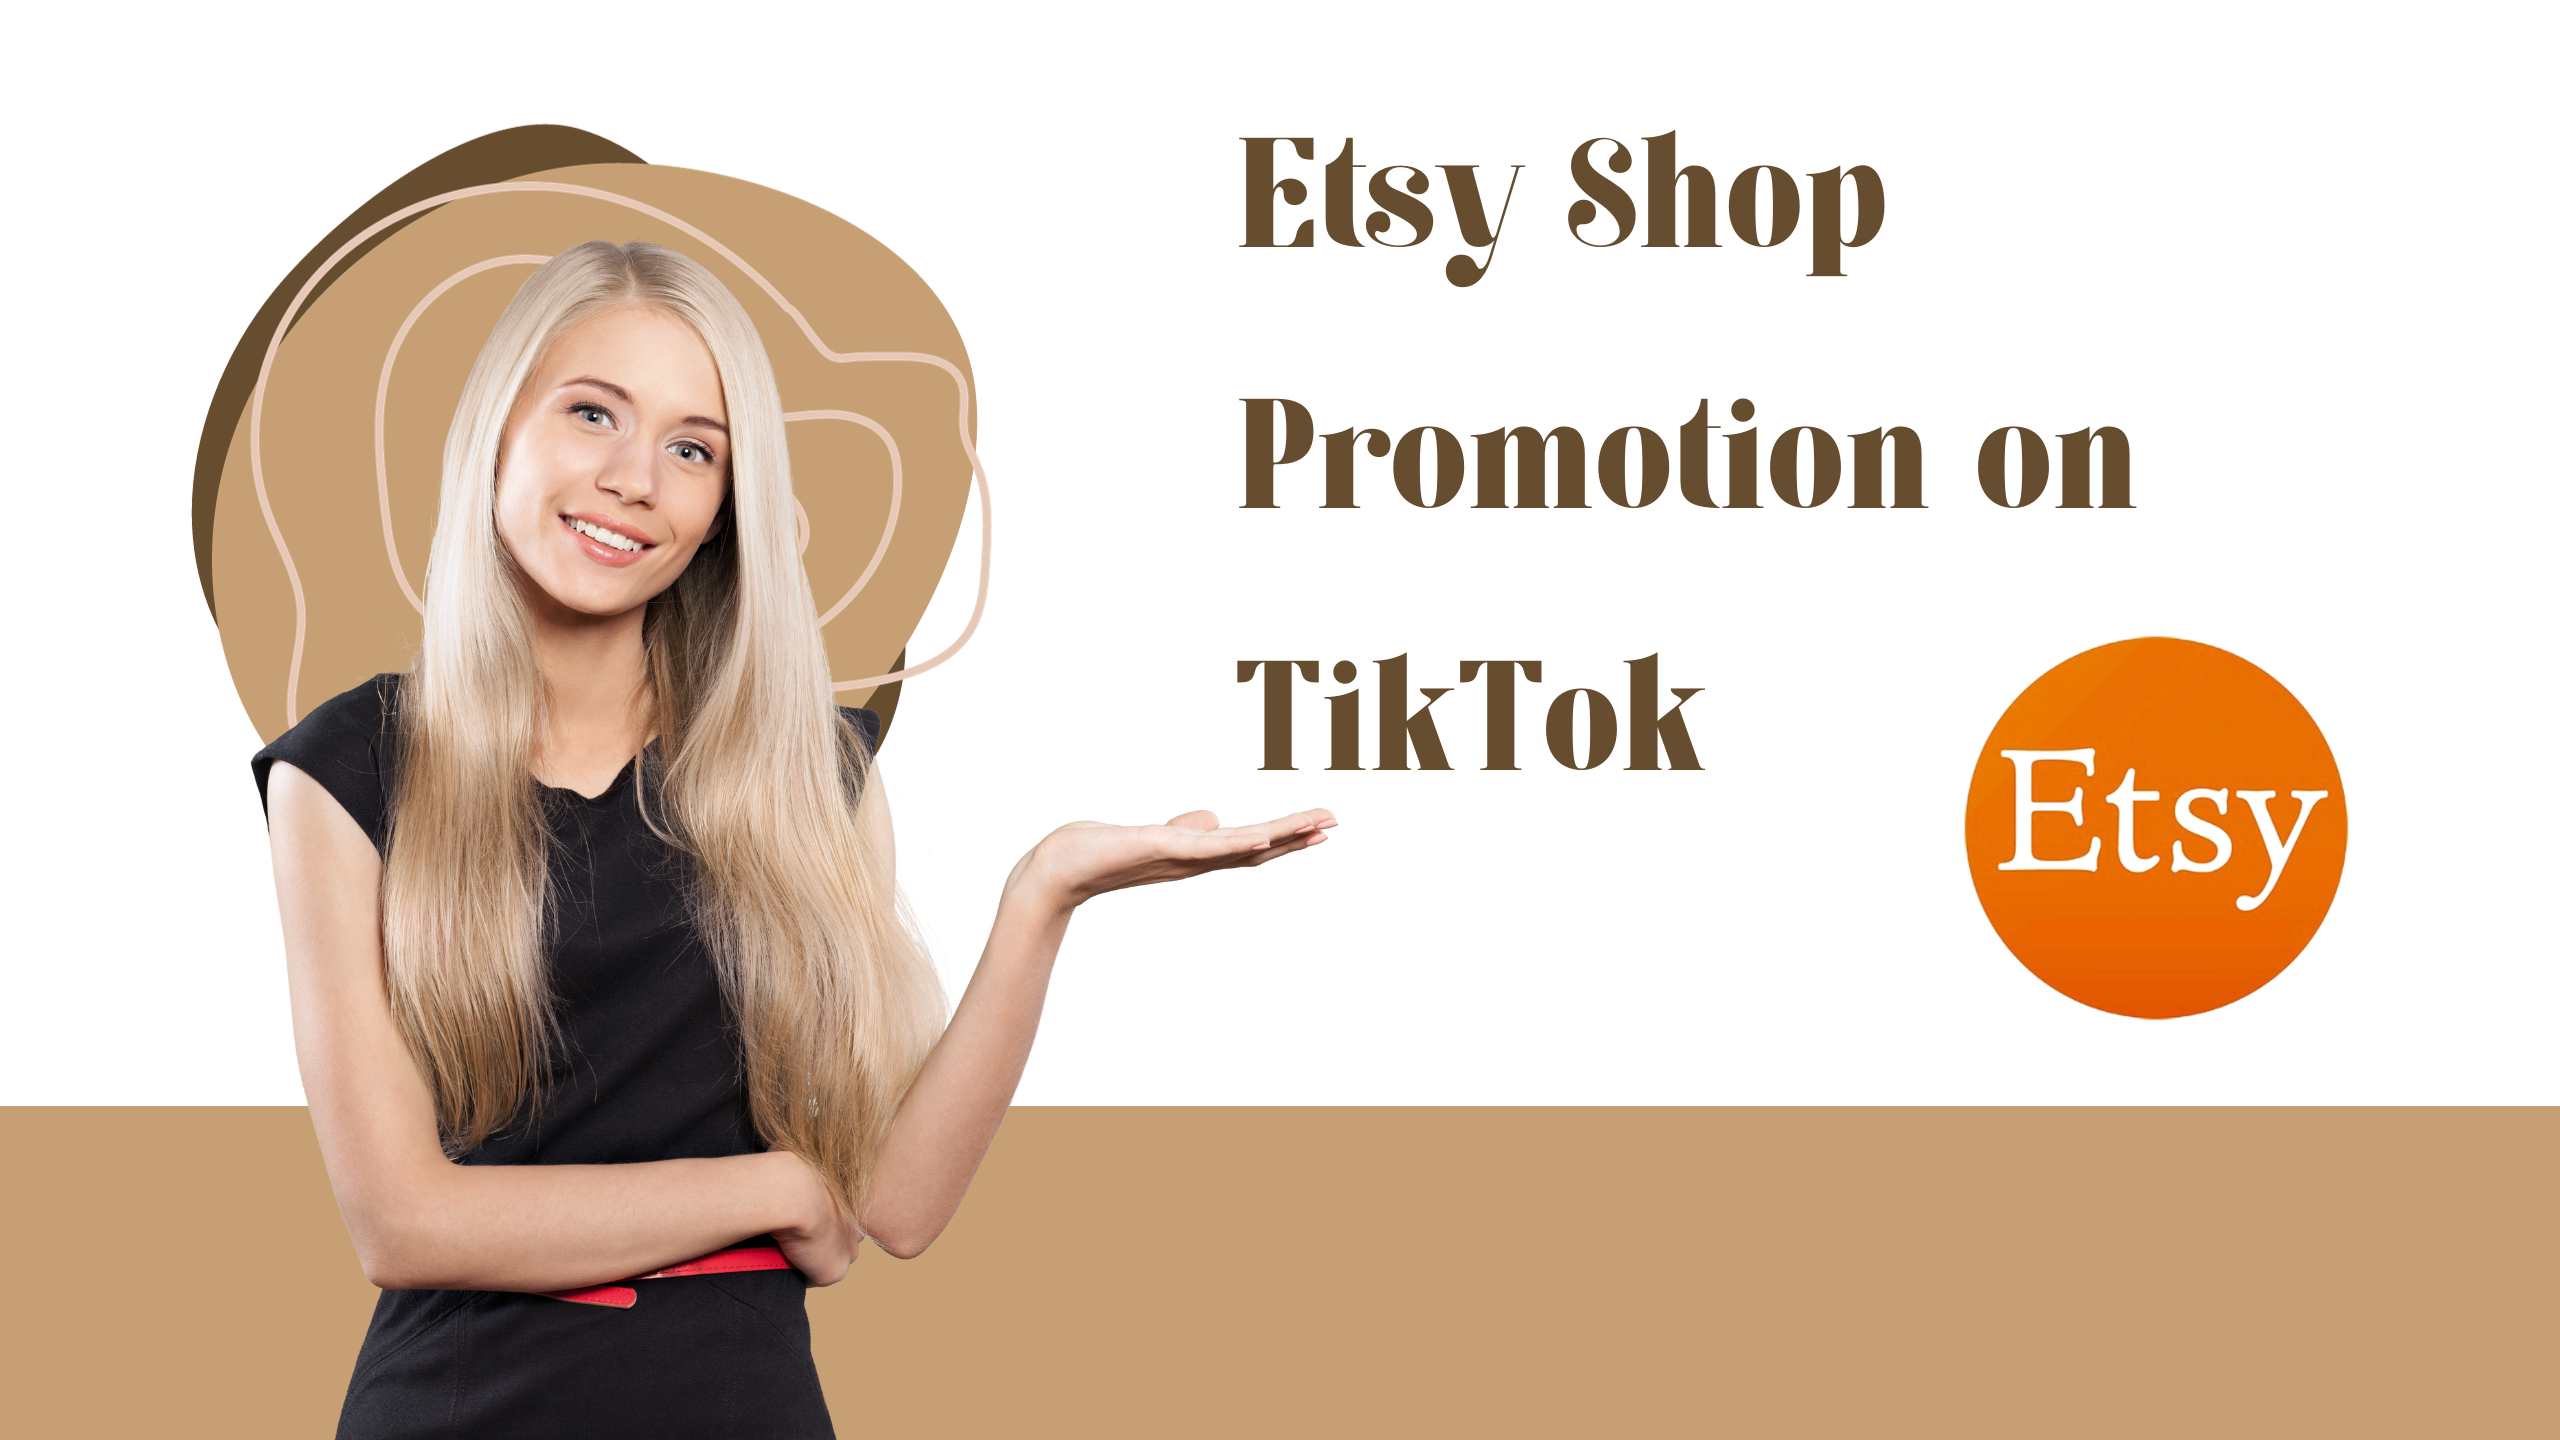 How to Promote Your Etsy Shop Effectively on TikTok